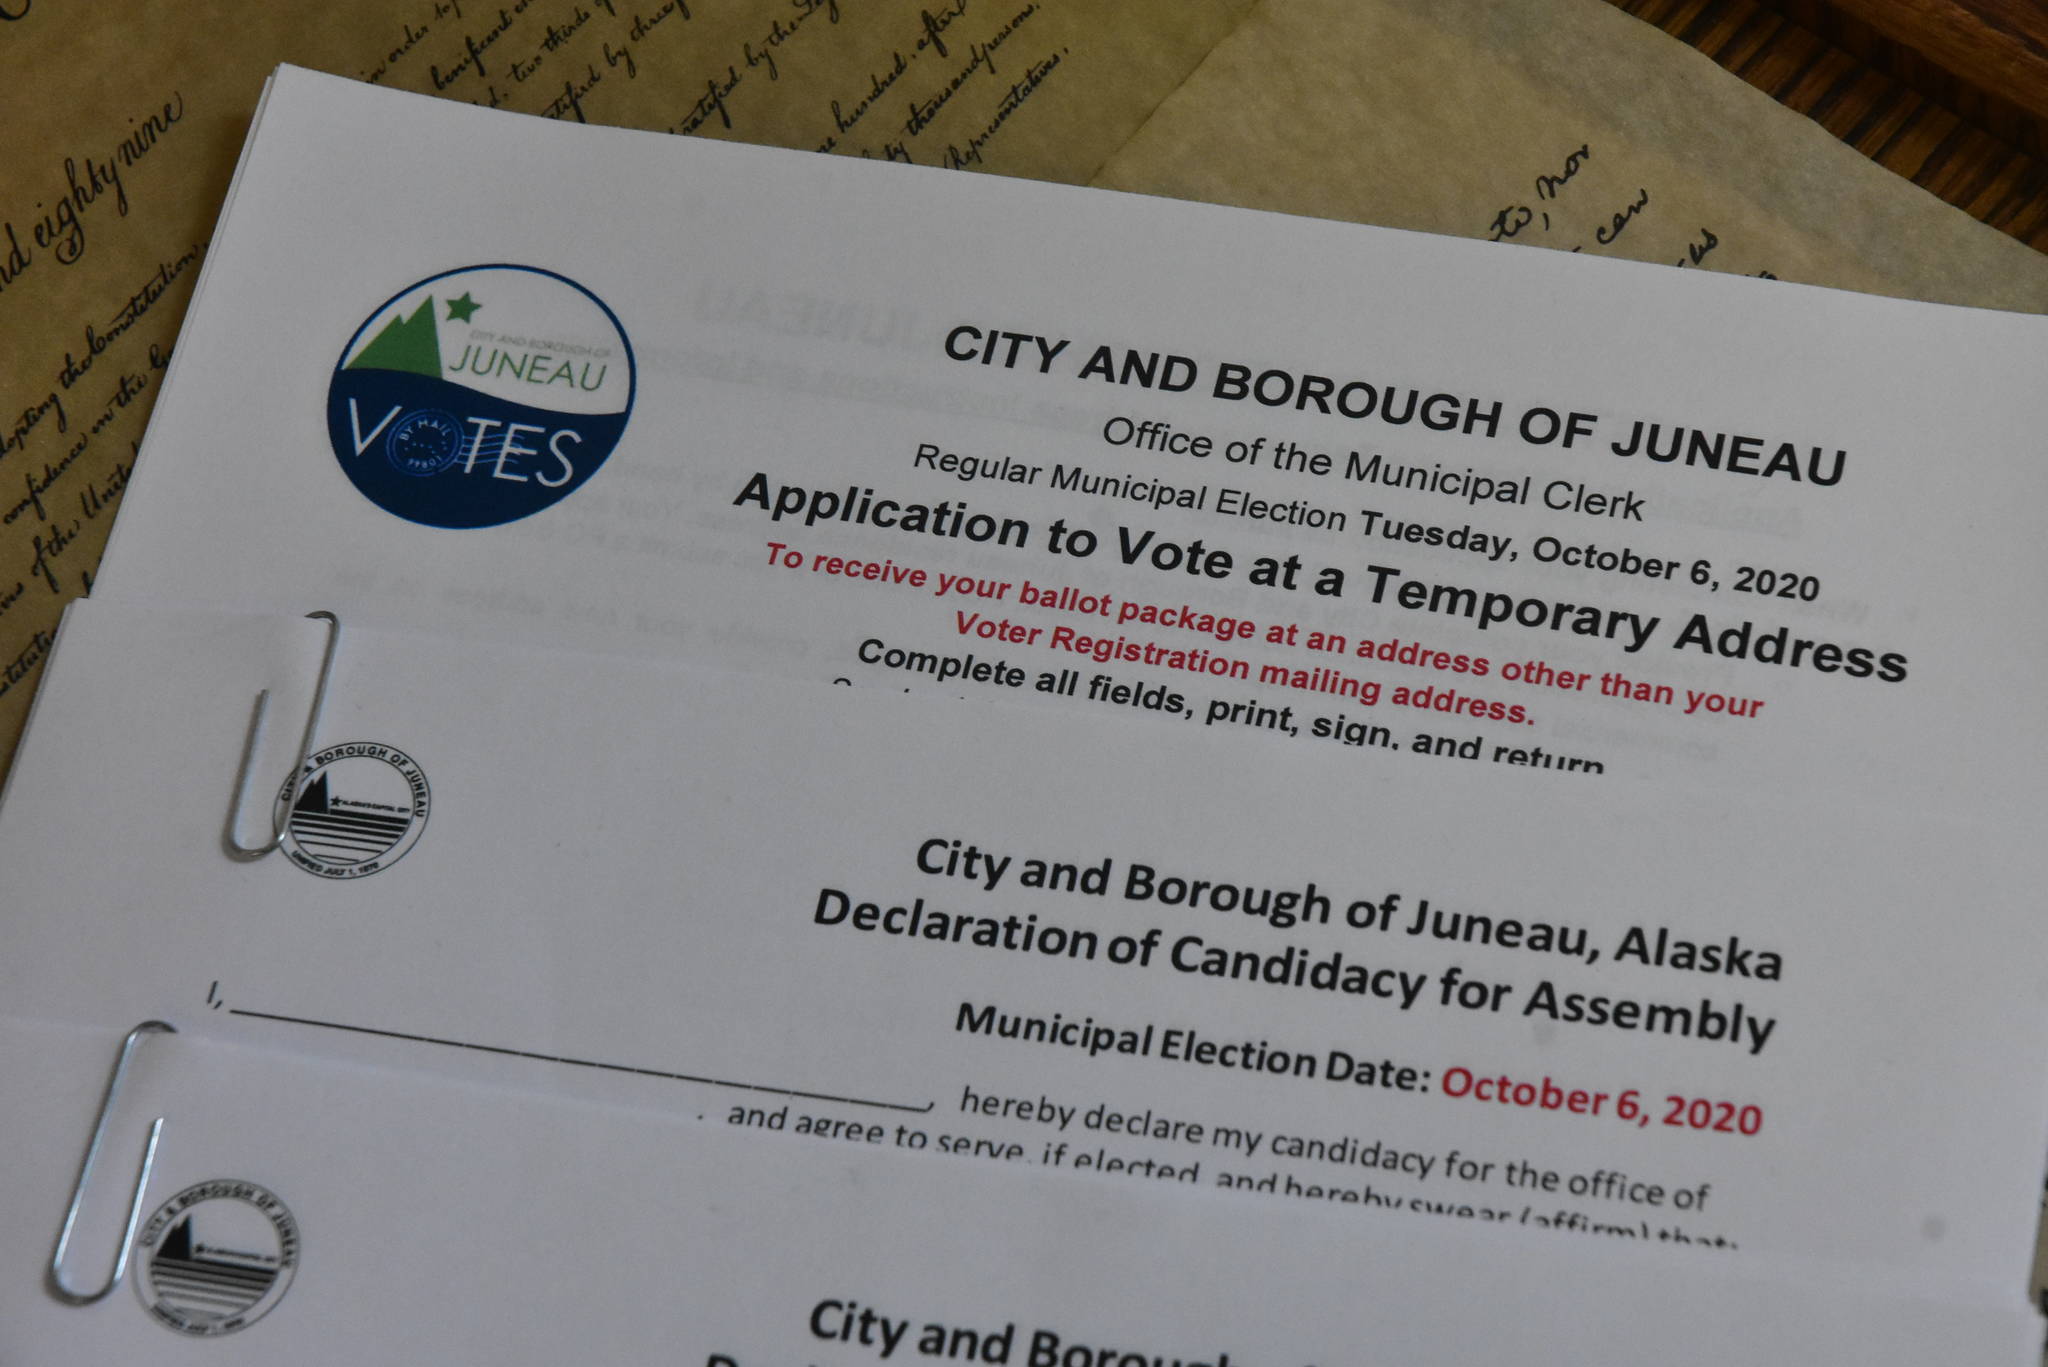 Municipal elections for the City and Borough of Juneau will be held on Oct. 6, 2020, now that candidates have been finalized. (Peter Segall / Juneau Empire)